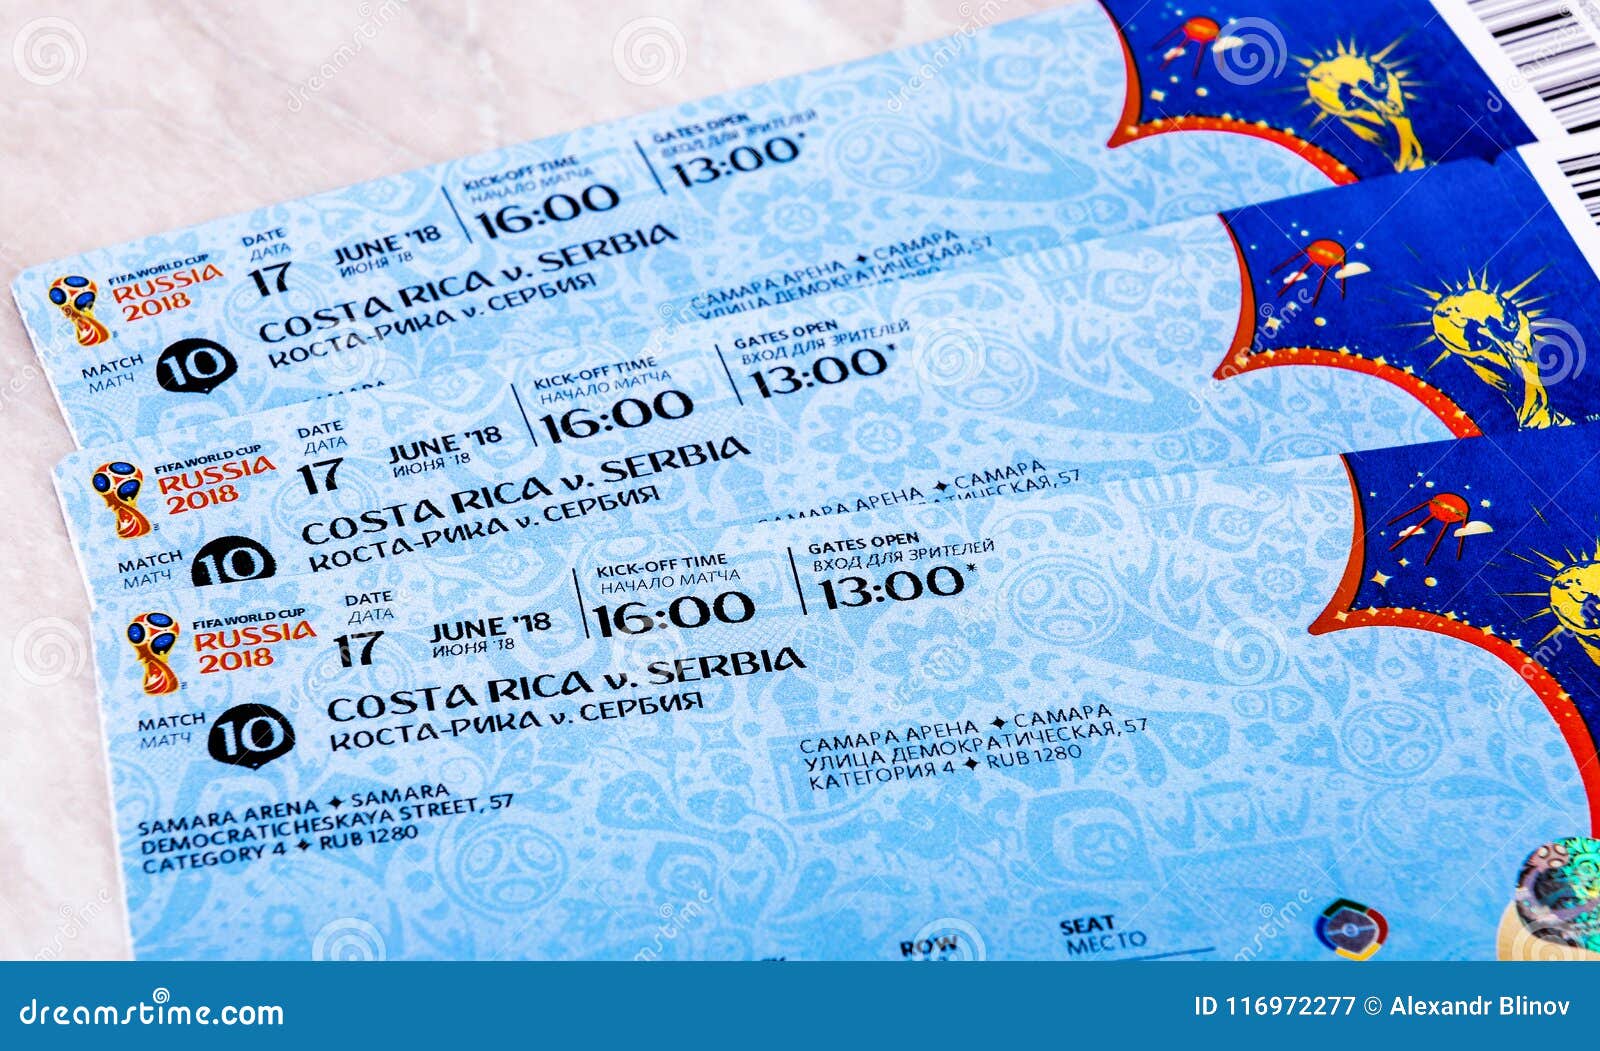 Tickets russia. Билет ЧМ 2018. FIFA tickets. Tickets with foto.